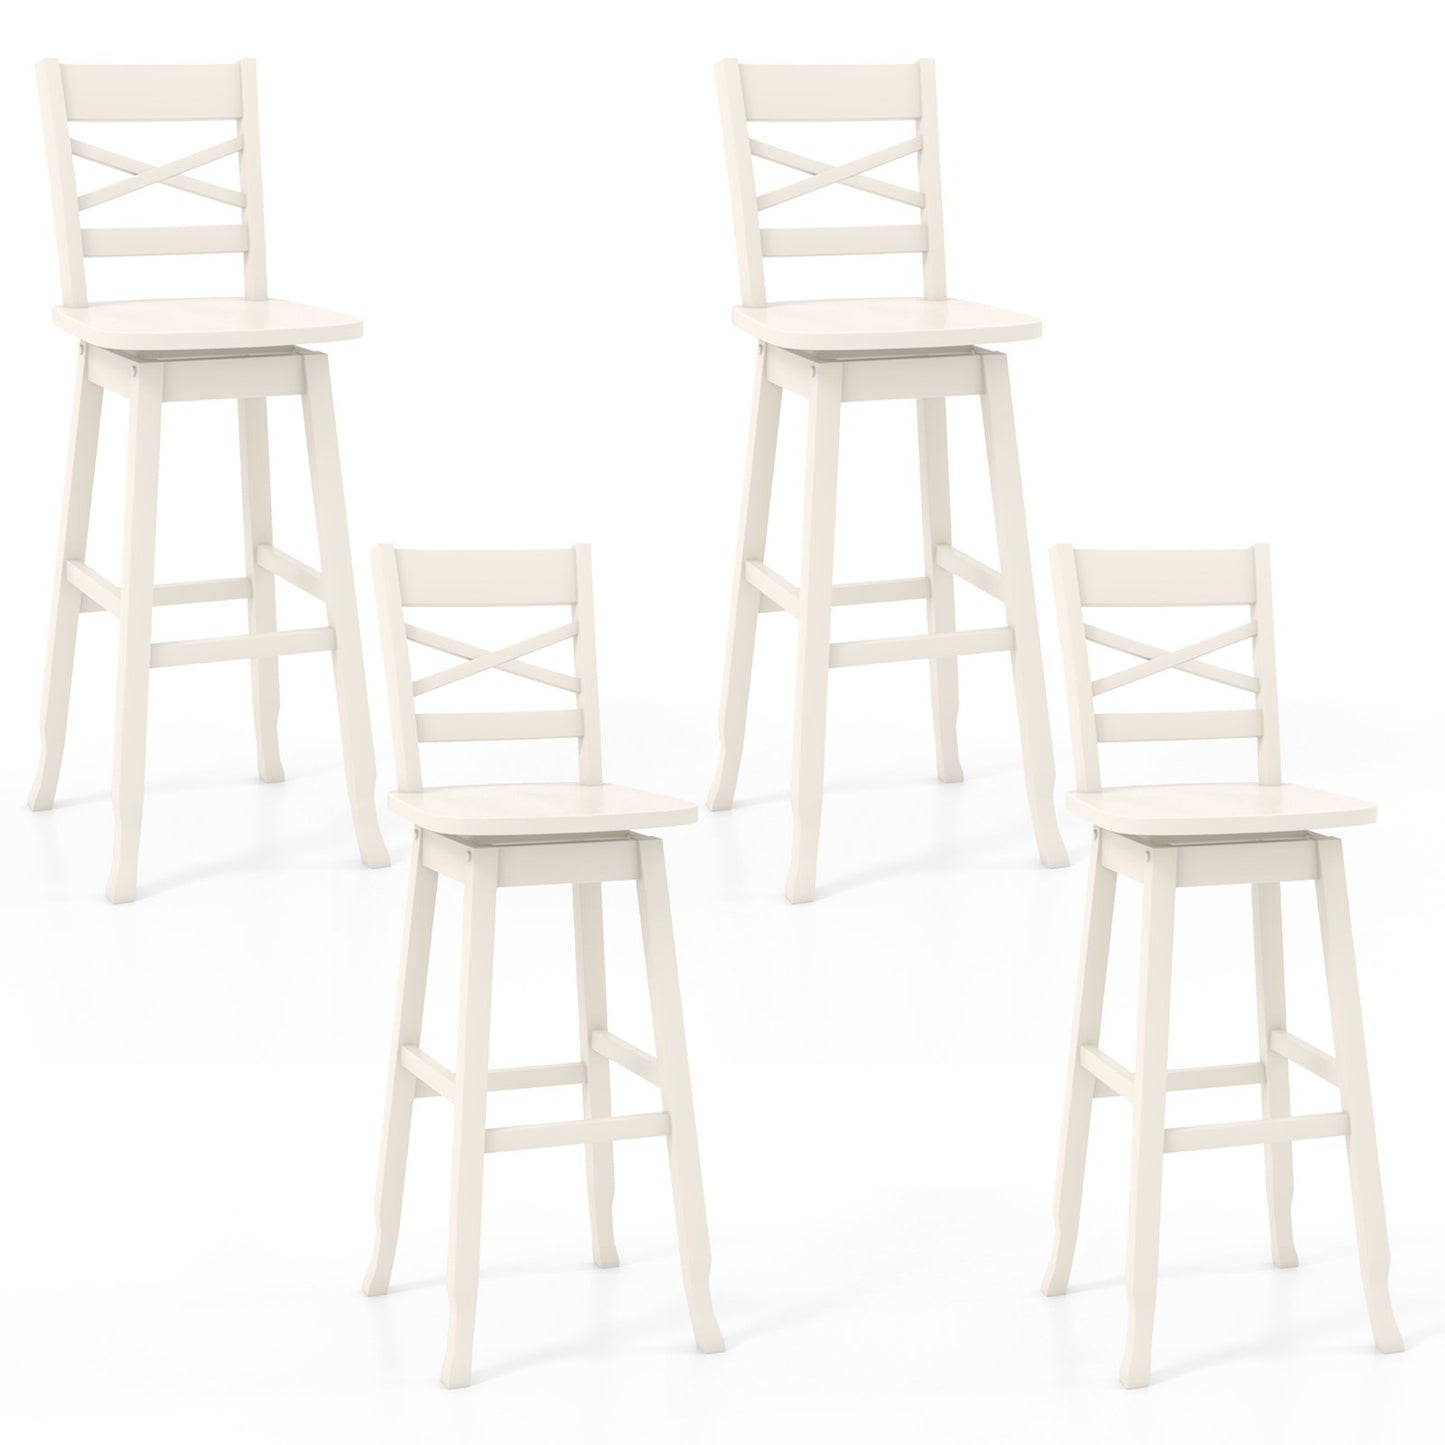 Swivel 30-Inch Bar Height Stool Set of 2 with Footrest, White